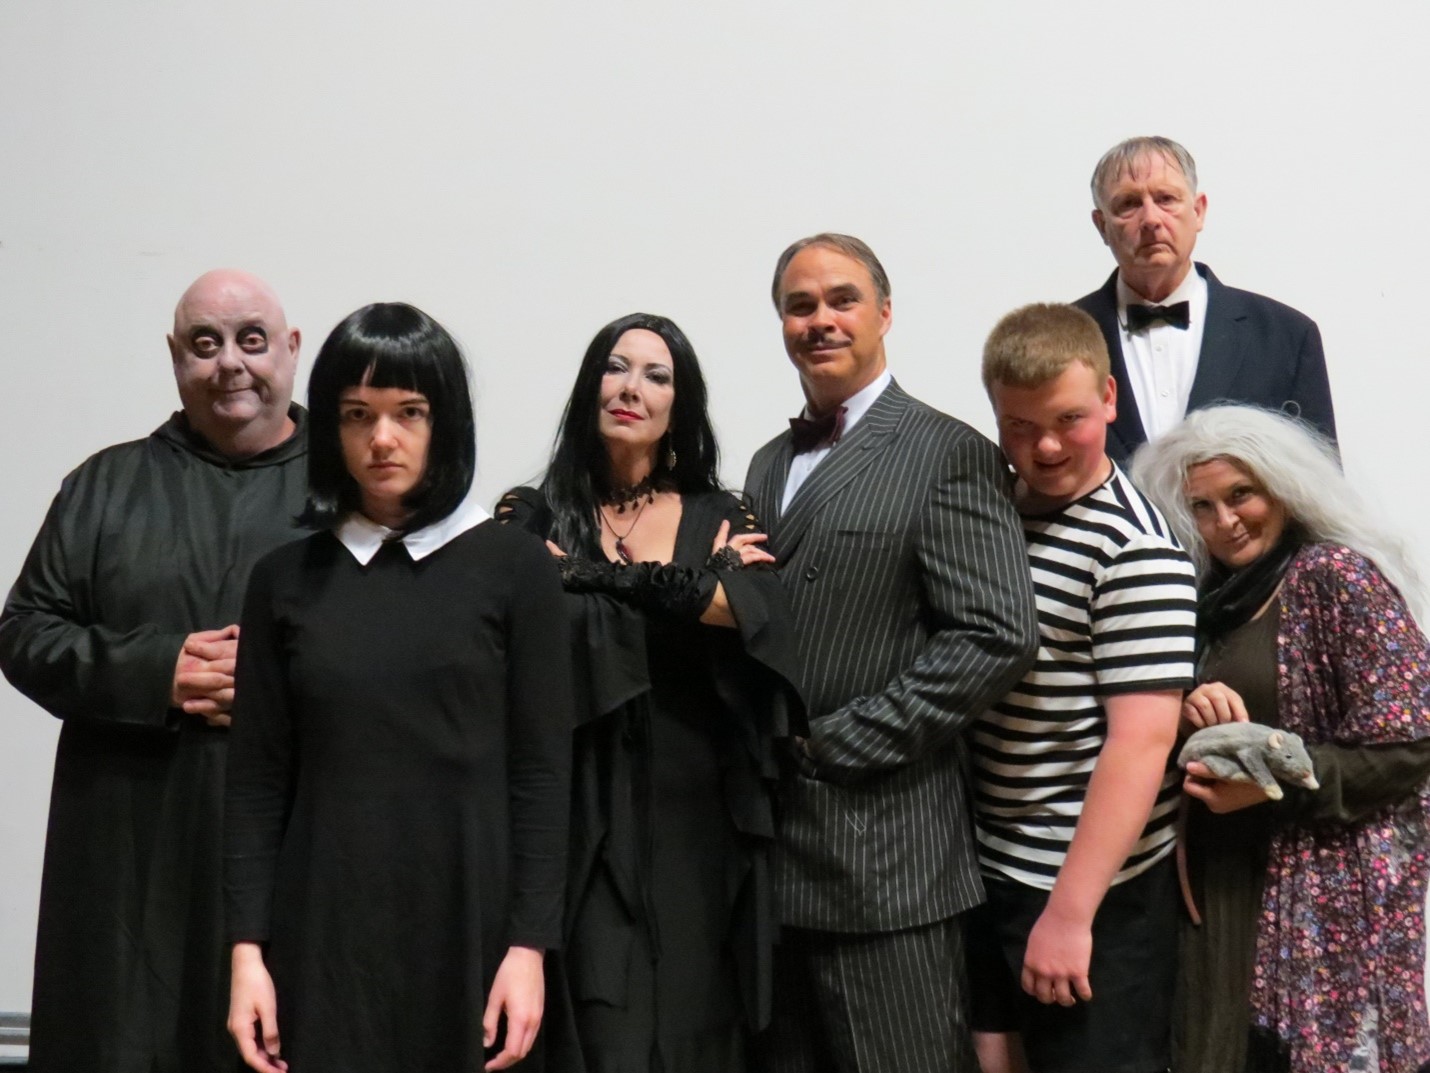 New Wednesday video spotlights The Addams Family's daughter